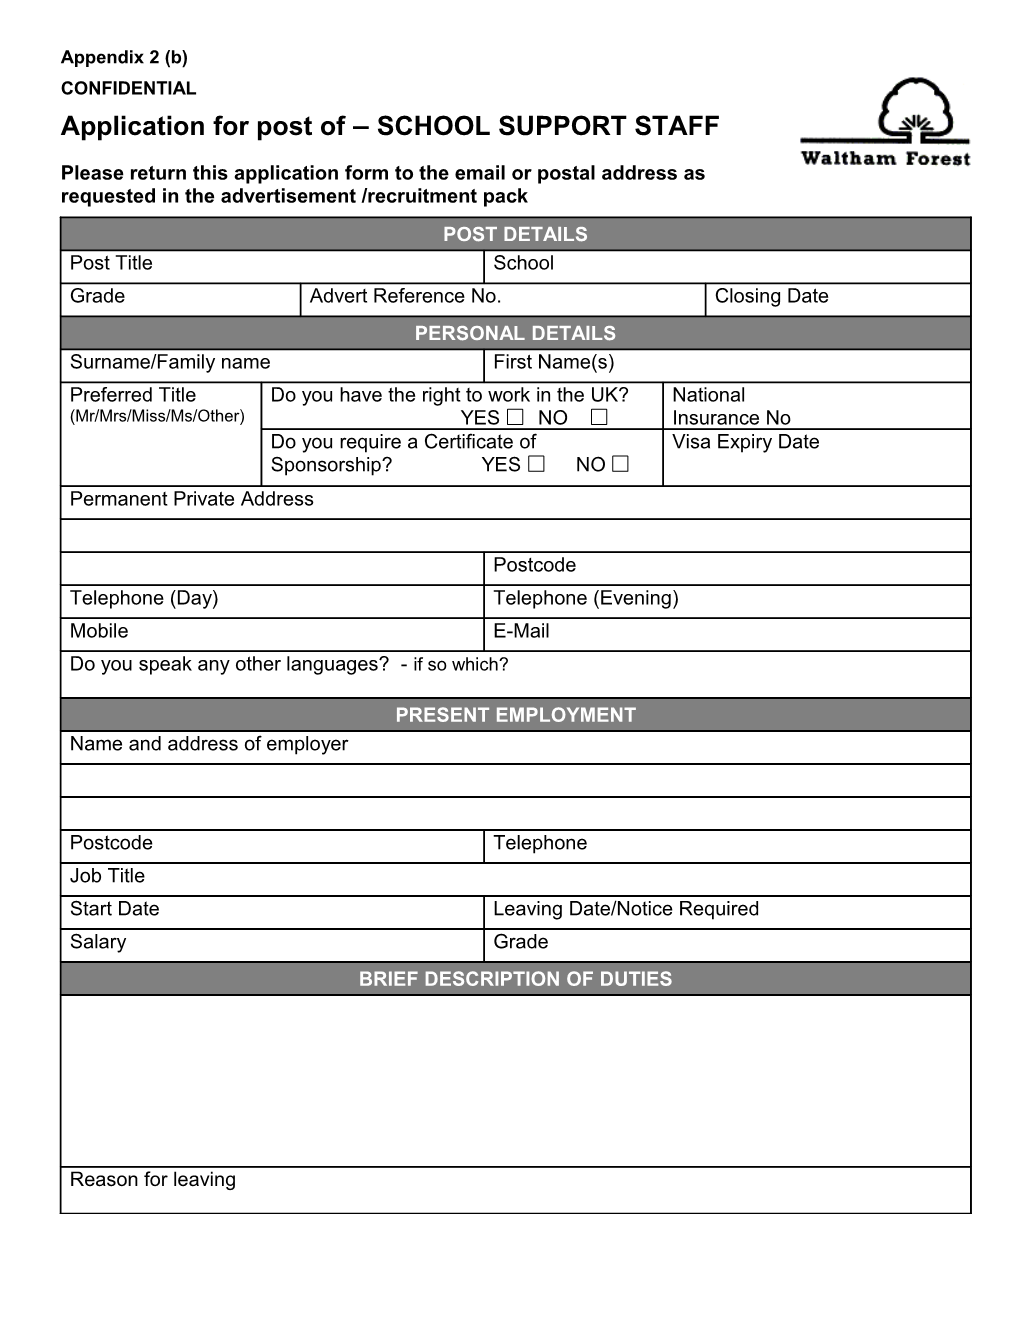 Application for Post of SCHOOL SUPPORT STAFF